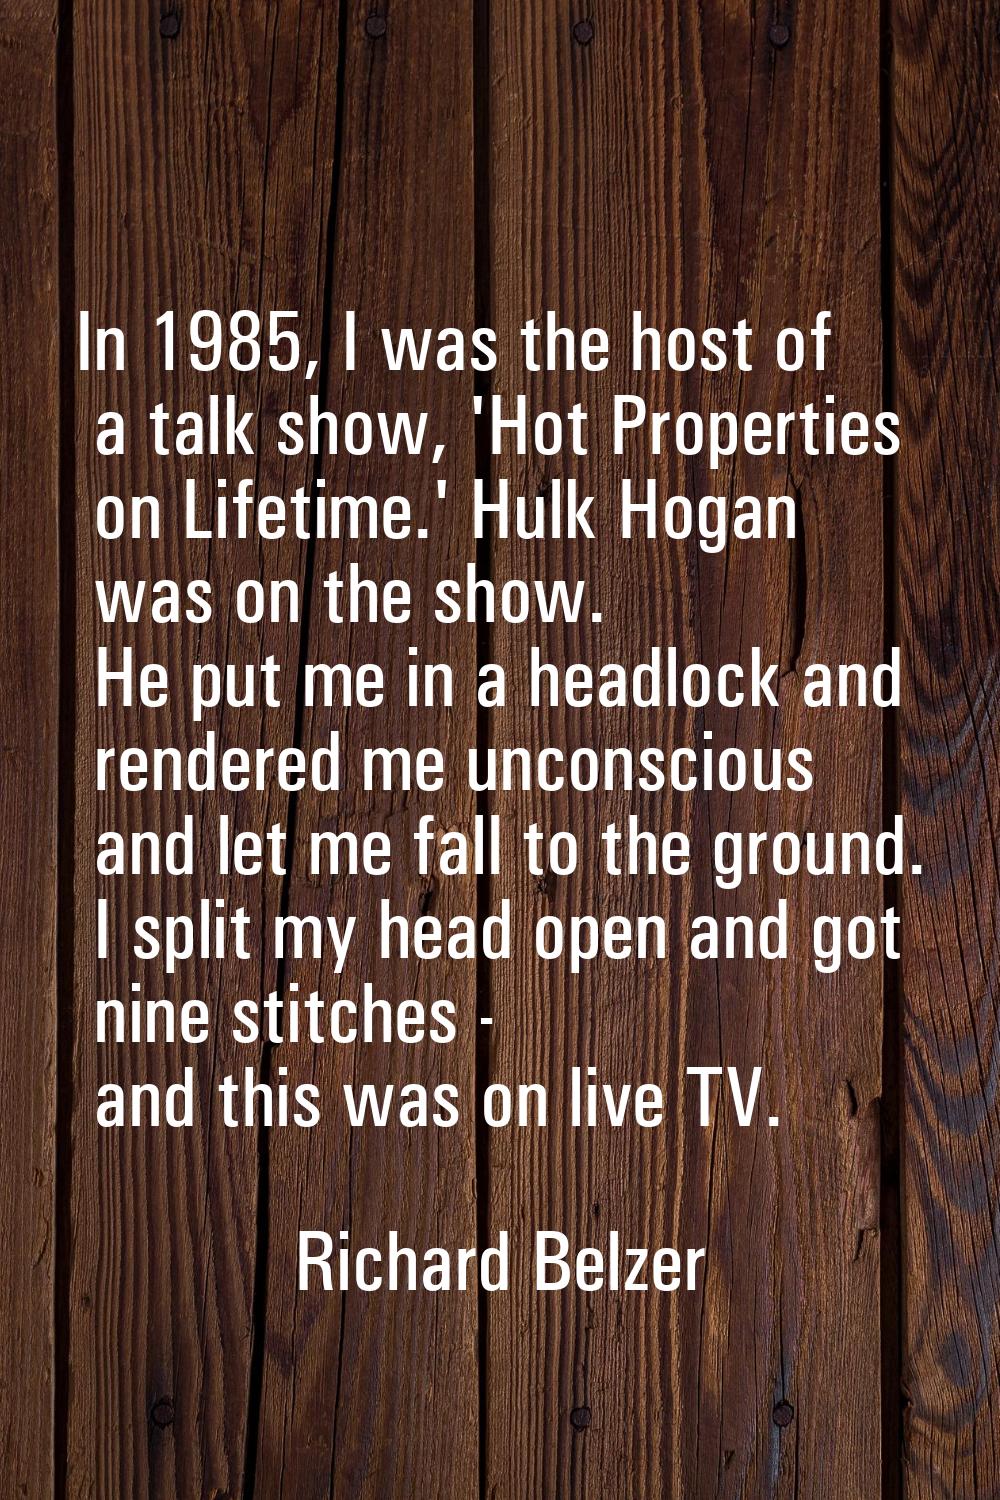 In 1985, I was the host of a talk show, 'Hot Properties on Lifetime.' Hulk Hogan was on the show. H